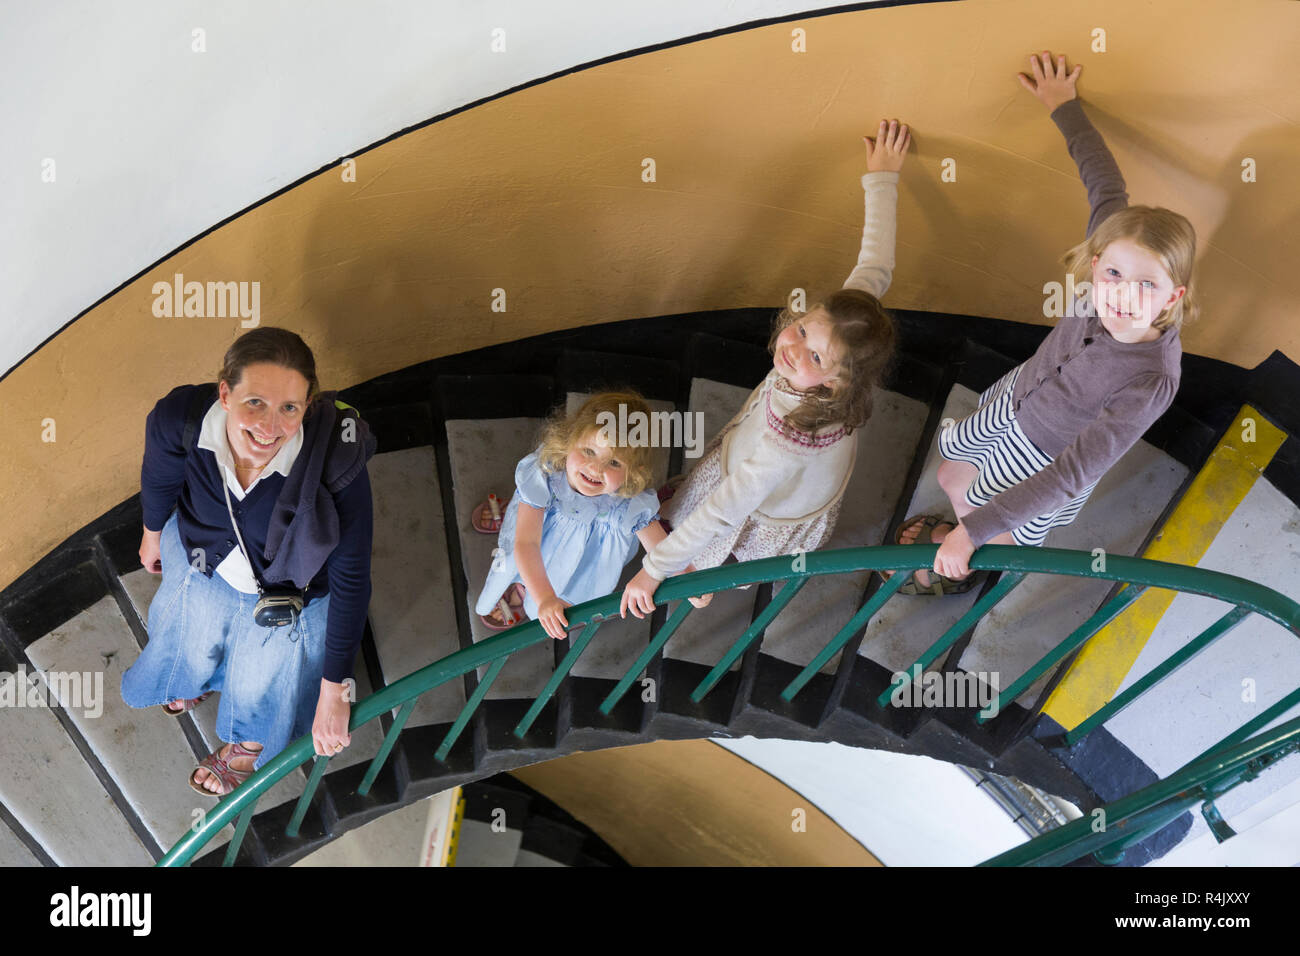 Mother mum and family of children / kids / tourists / visitors descend the spiral staircase inside Saint Catherine's Lighthouse on the Isle of Wight. UK England. (98) Stock Photo